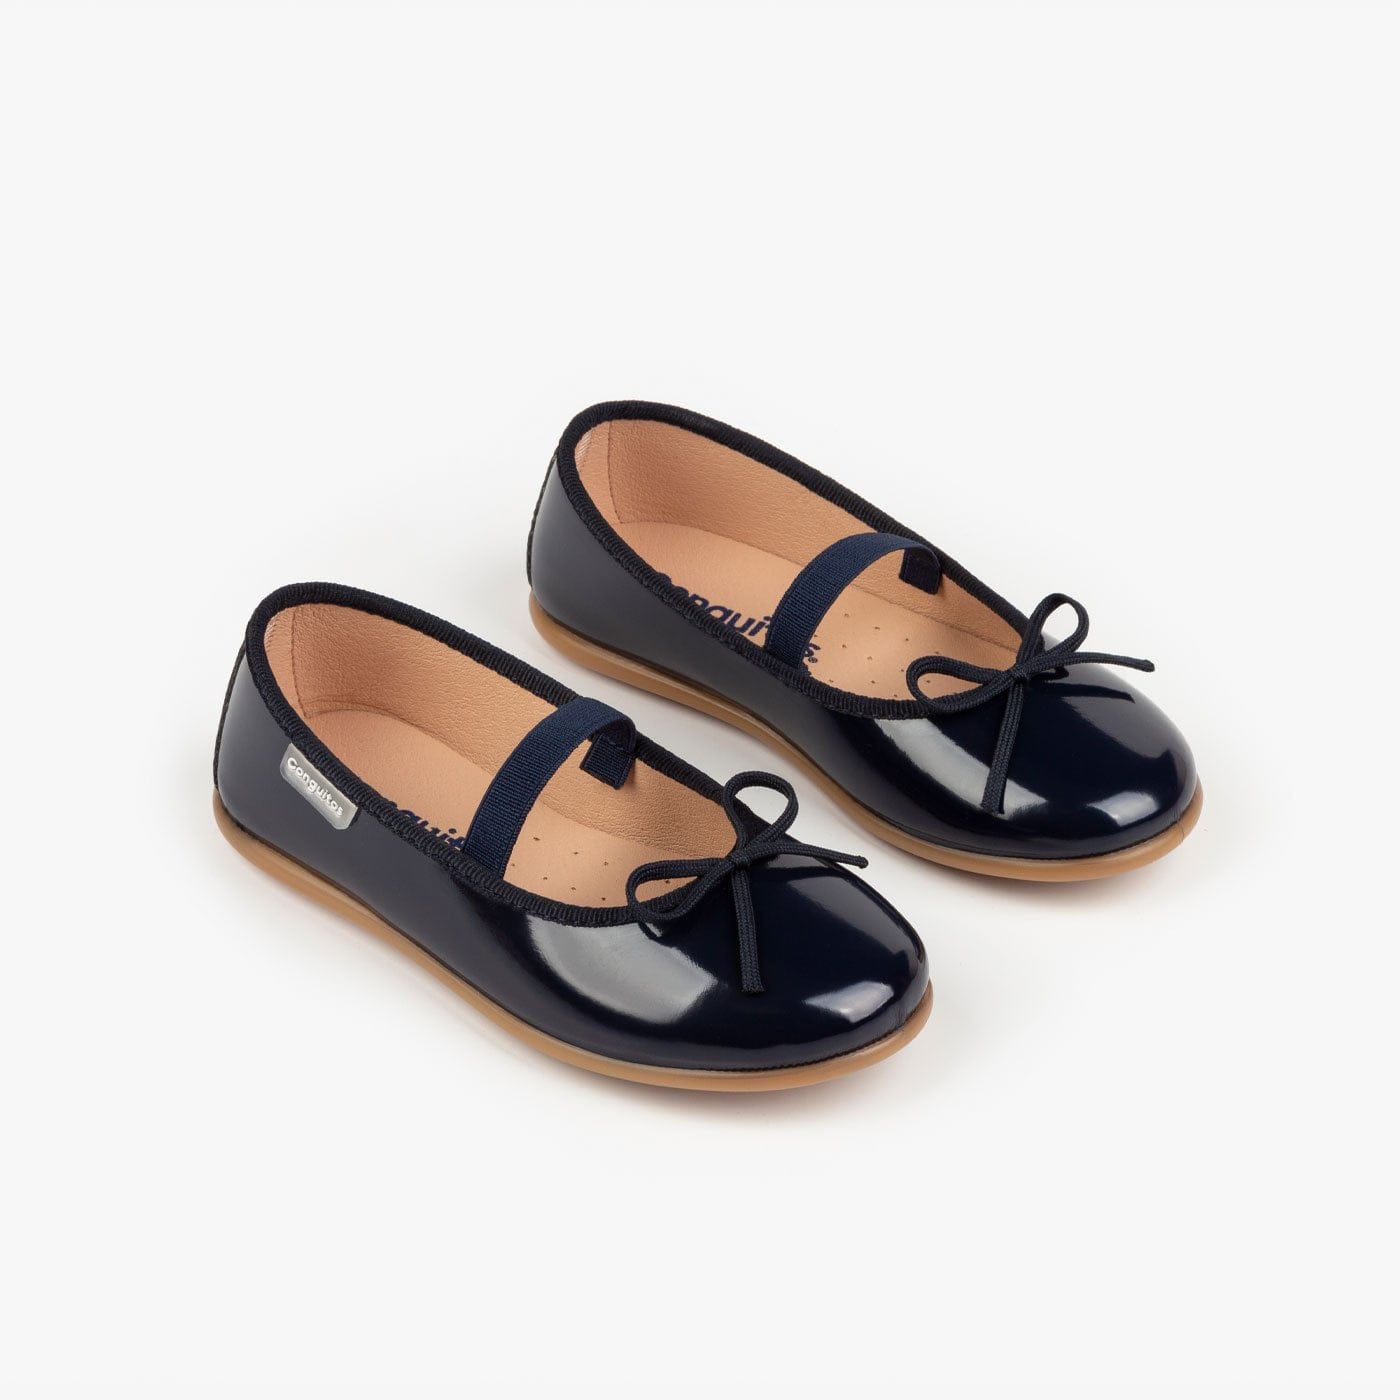 CONGUITOS Shoes Girl's Navy Basic Patent Leather Ballerinas